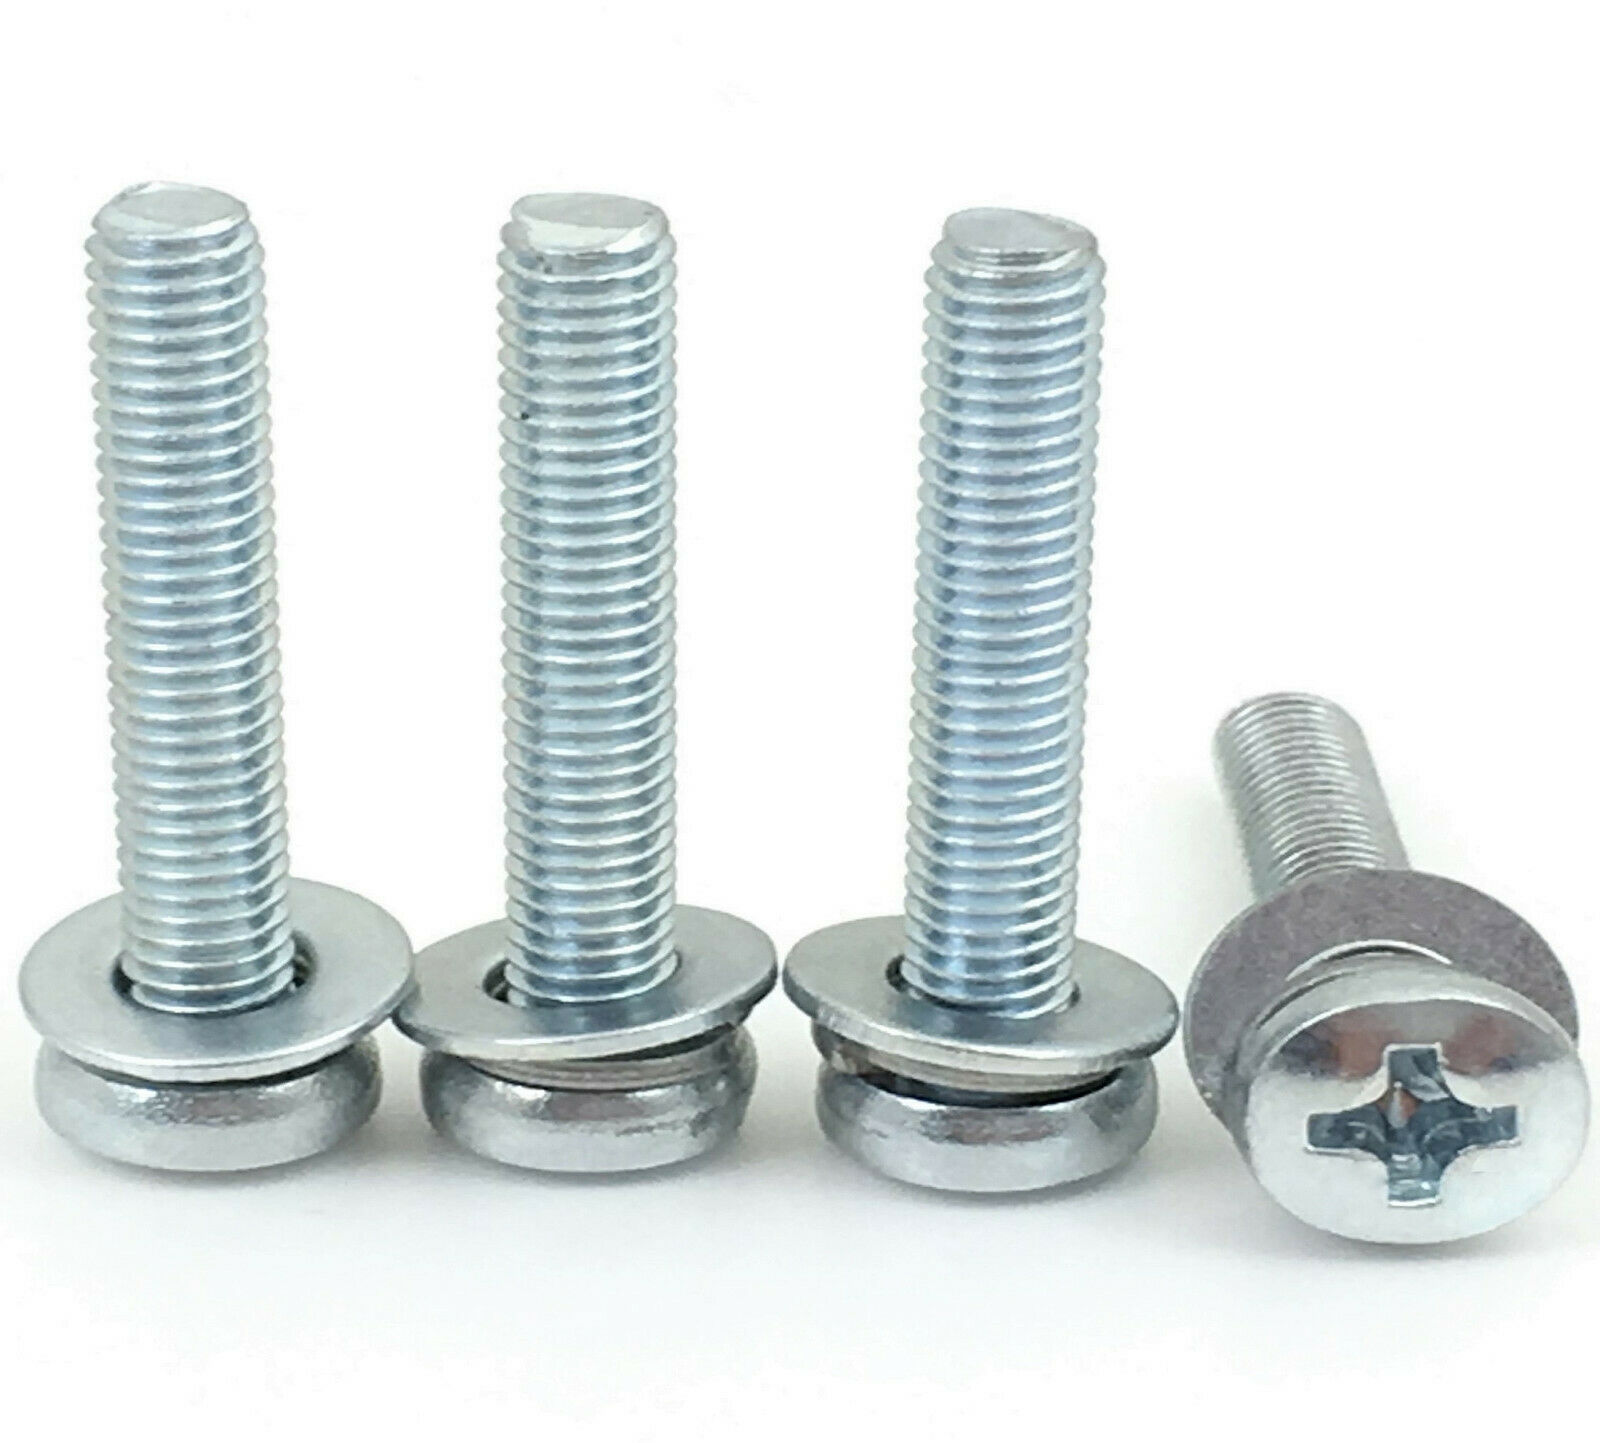 Fixing Screws for Sharp LC-32DH510E   TV Stand Pack of 5  #512 